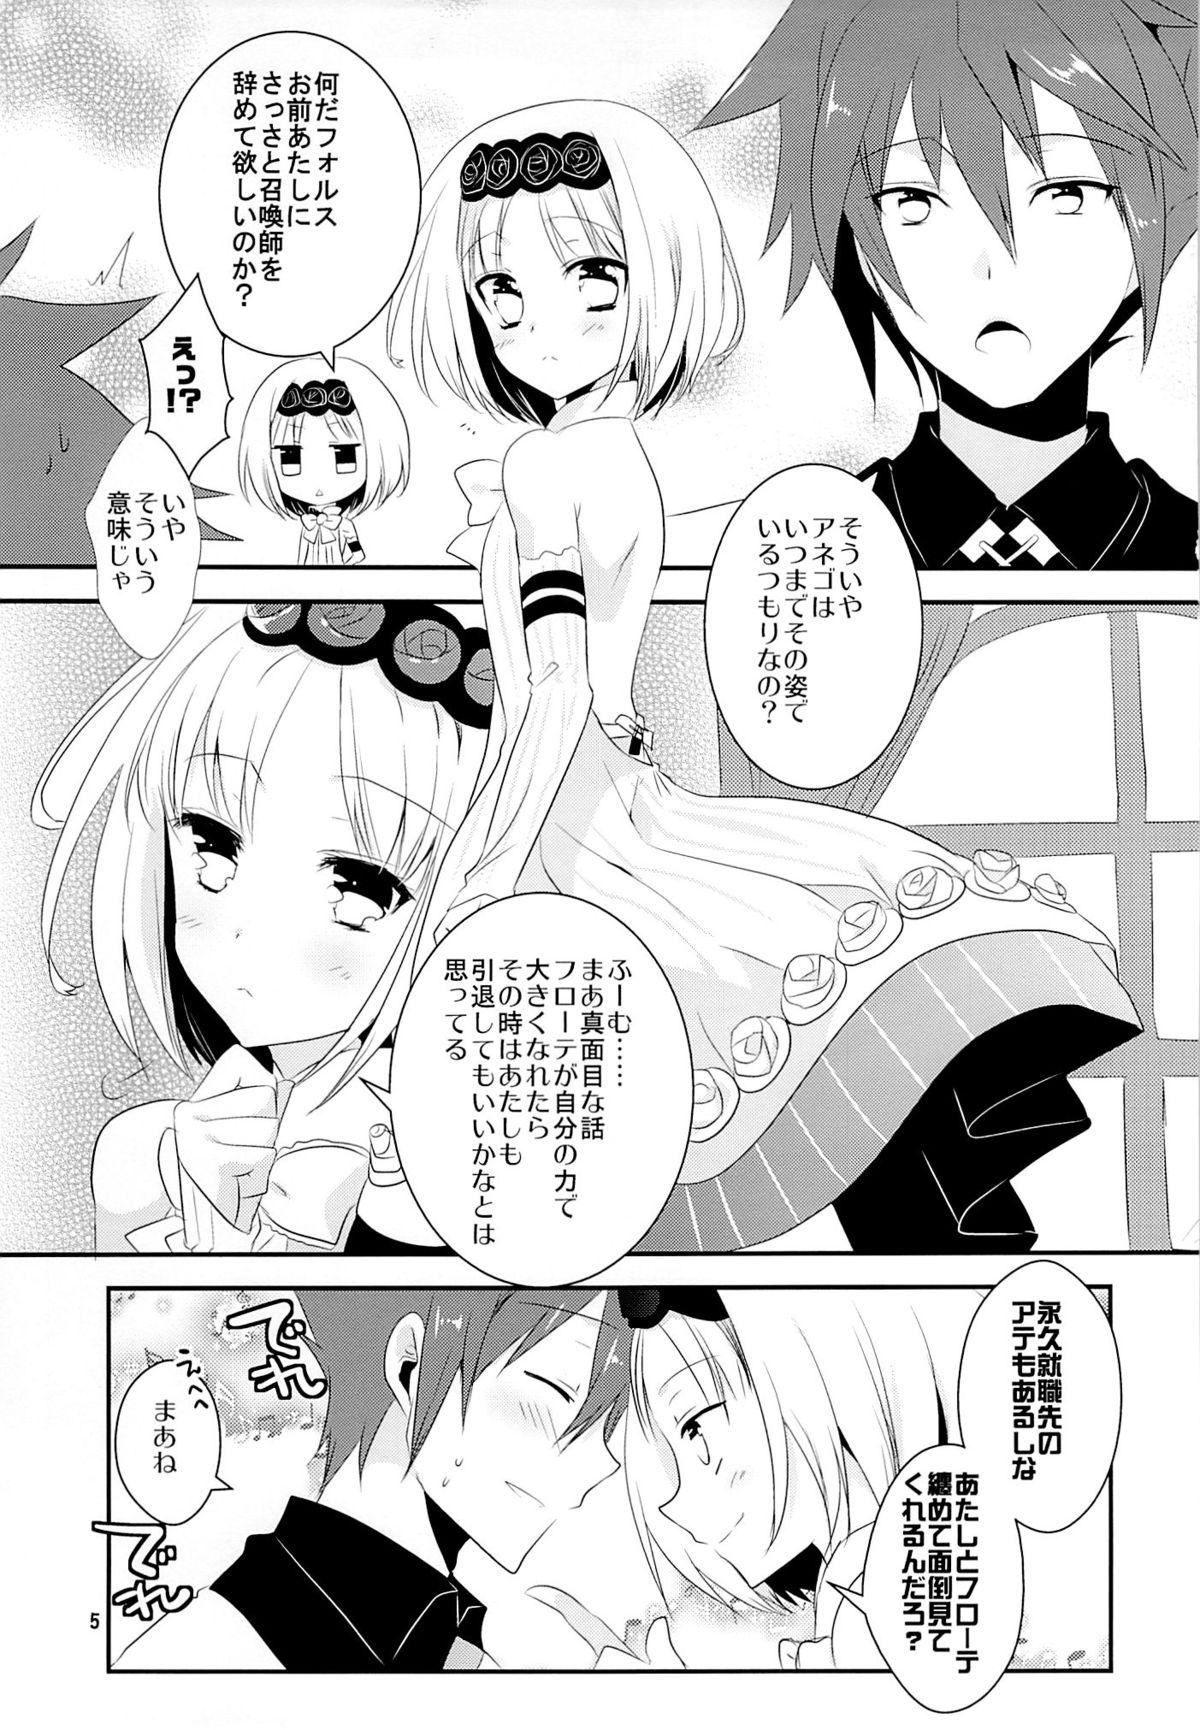 Shemales Ane Loli! - Summon night Brother Sister - Page 4